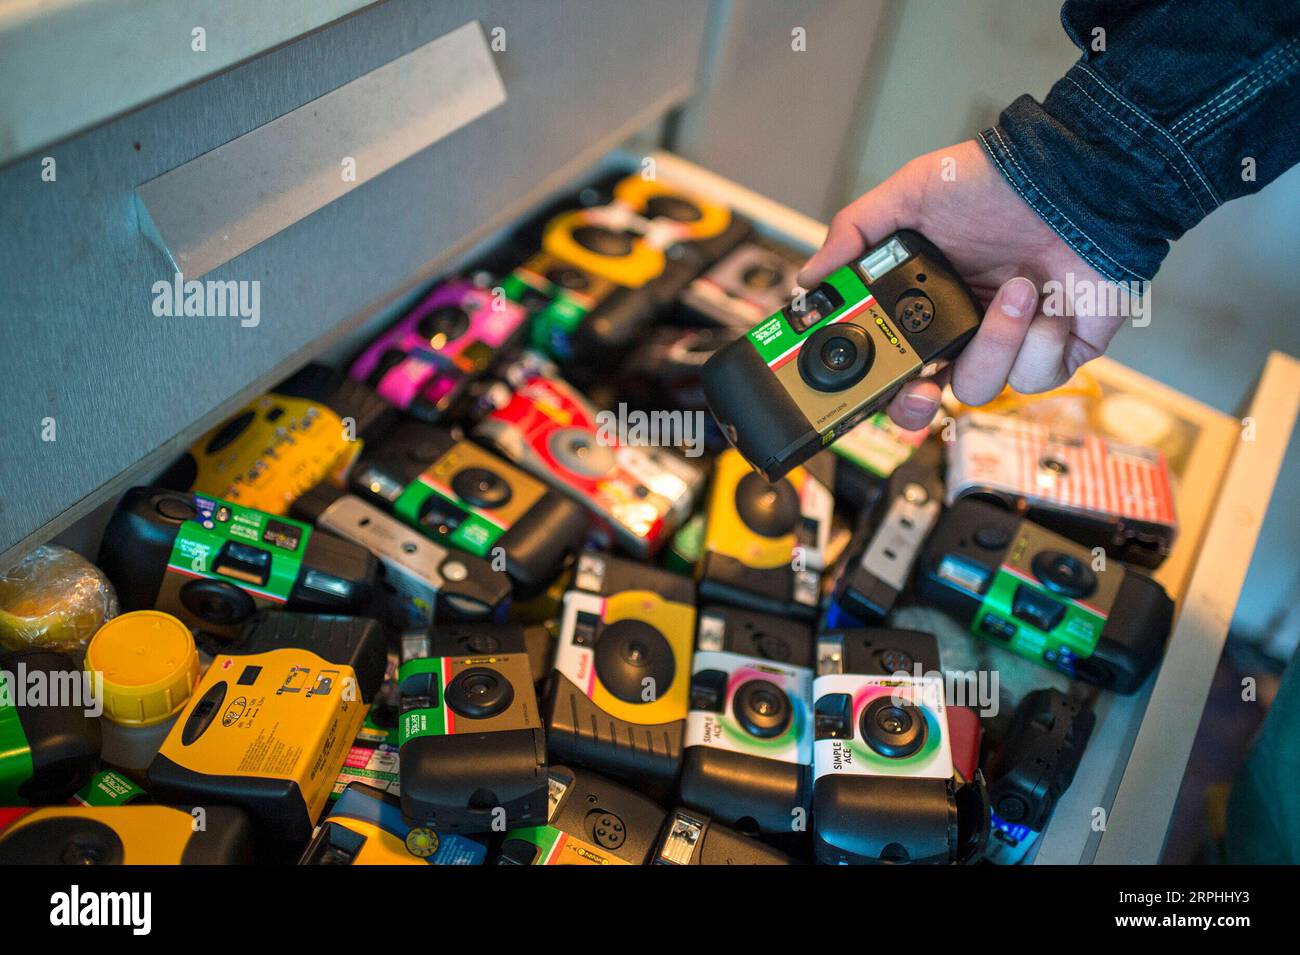 191109 -- BEIJING, Nov. 9, 2019 -- Liu Gaochao shows a collection of used disposable cameras from customers at his studio in Beijing, capital of China, Oct. 26, 2019. It s been more than five years since Liu Gaochao embraced a career in film developing. On top of a high-rise mansion next to Liufang Station of Beijing Subway Line 13, Liu runs a studio, New Wave Film Lab, which also provides him a place to live. In 2012, Liu left his hometown in central China s Henan Province and headed for Beijing in pursuit of better opportunities. After he settled down in the capital city, he came across film Stock Photo